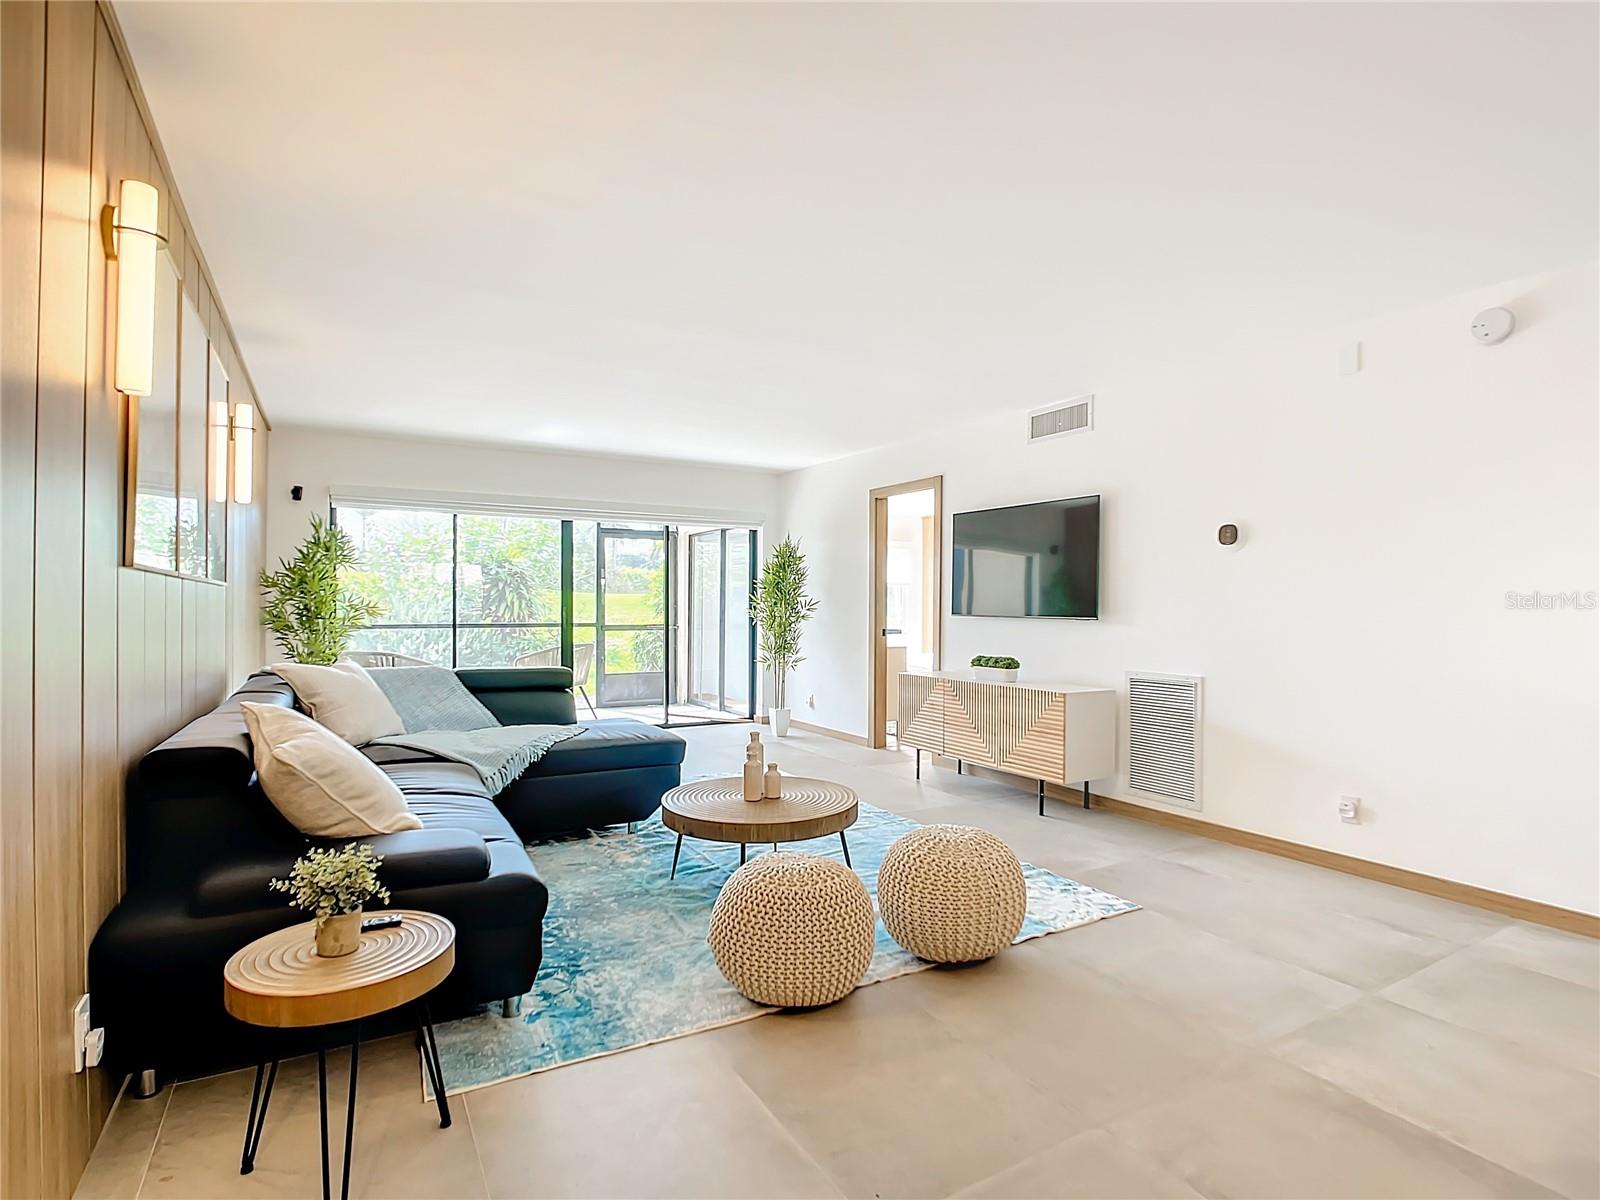 Light and Airy with a Mid Century Modern Beach Feel! 5532 PUERTA DEL SOL BLVD S, #136, ST PETERSBURG, FL 33715